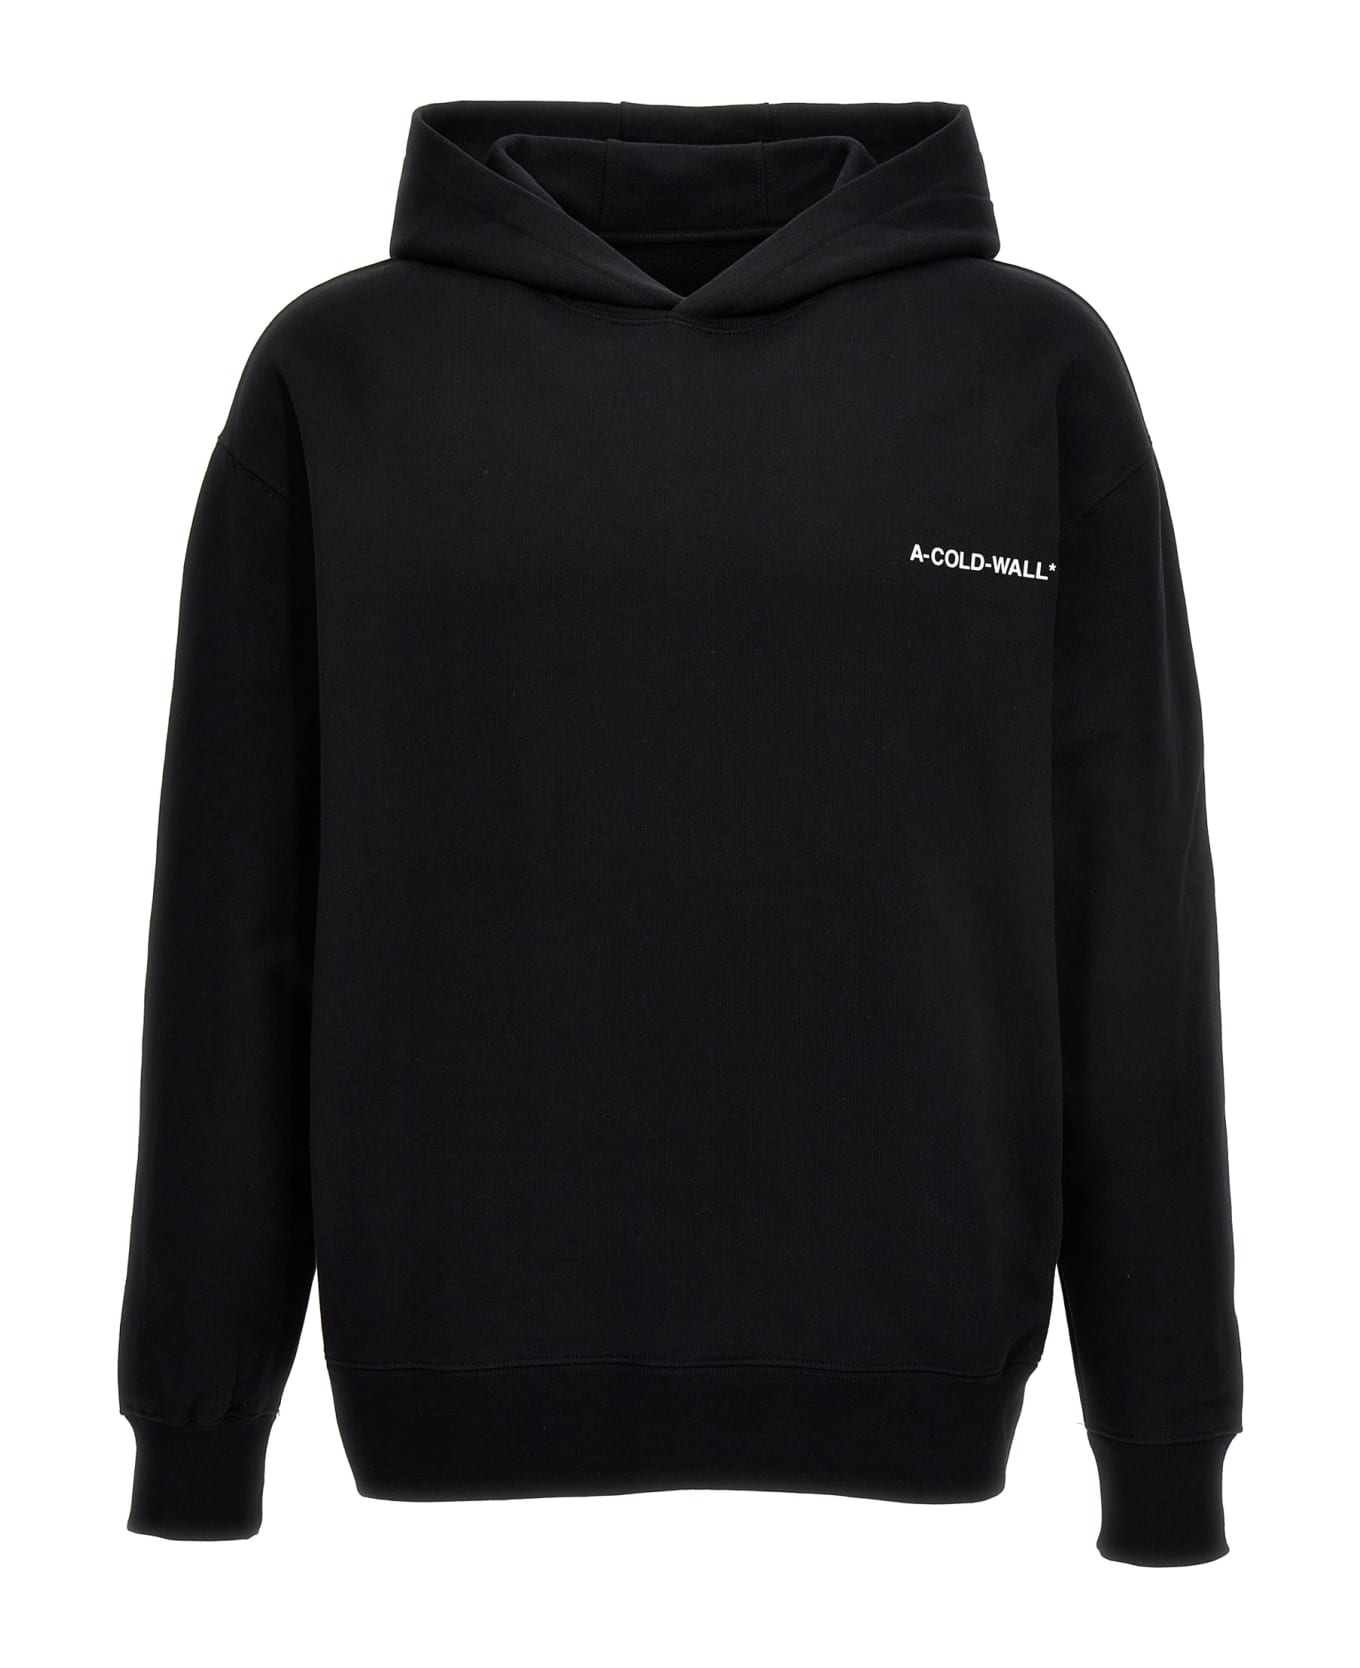 A-COLD-WALL 'essential Small Logo' Hoodie - Black  